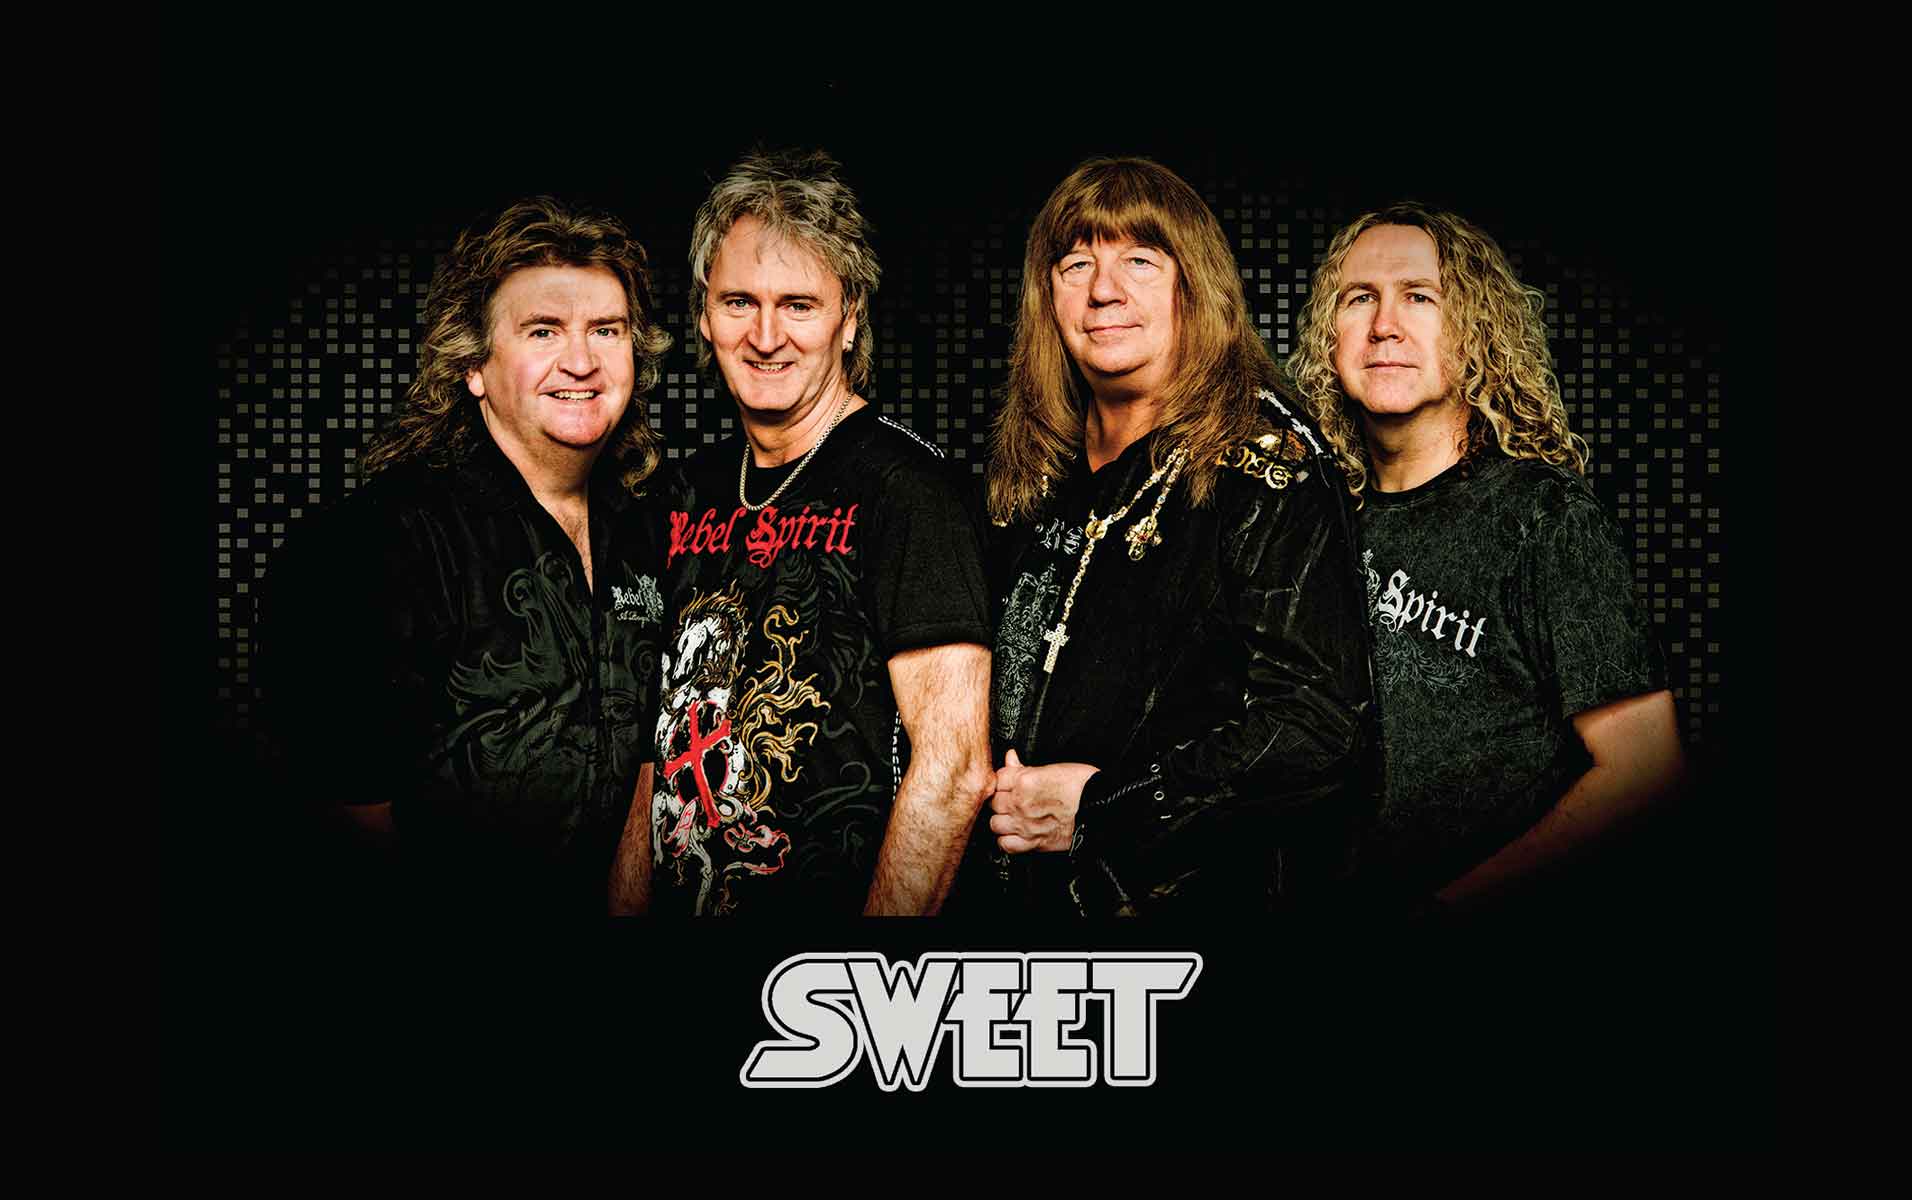 A Video Compilation of the Sweet's Greatest Hits | The Classic Music Vault